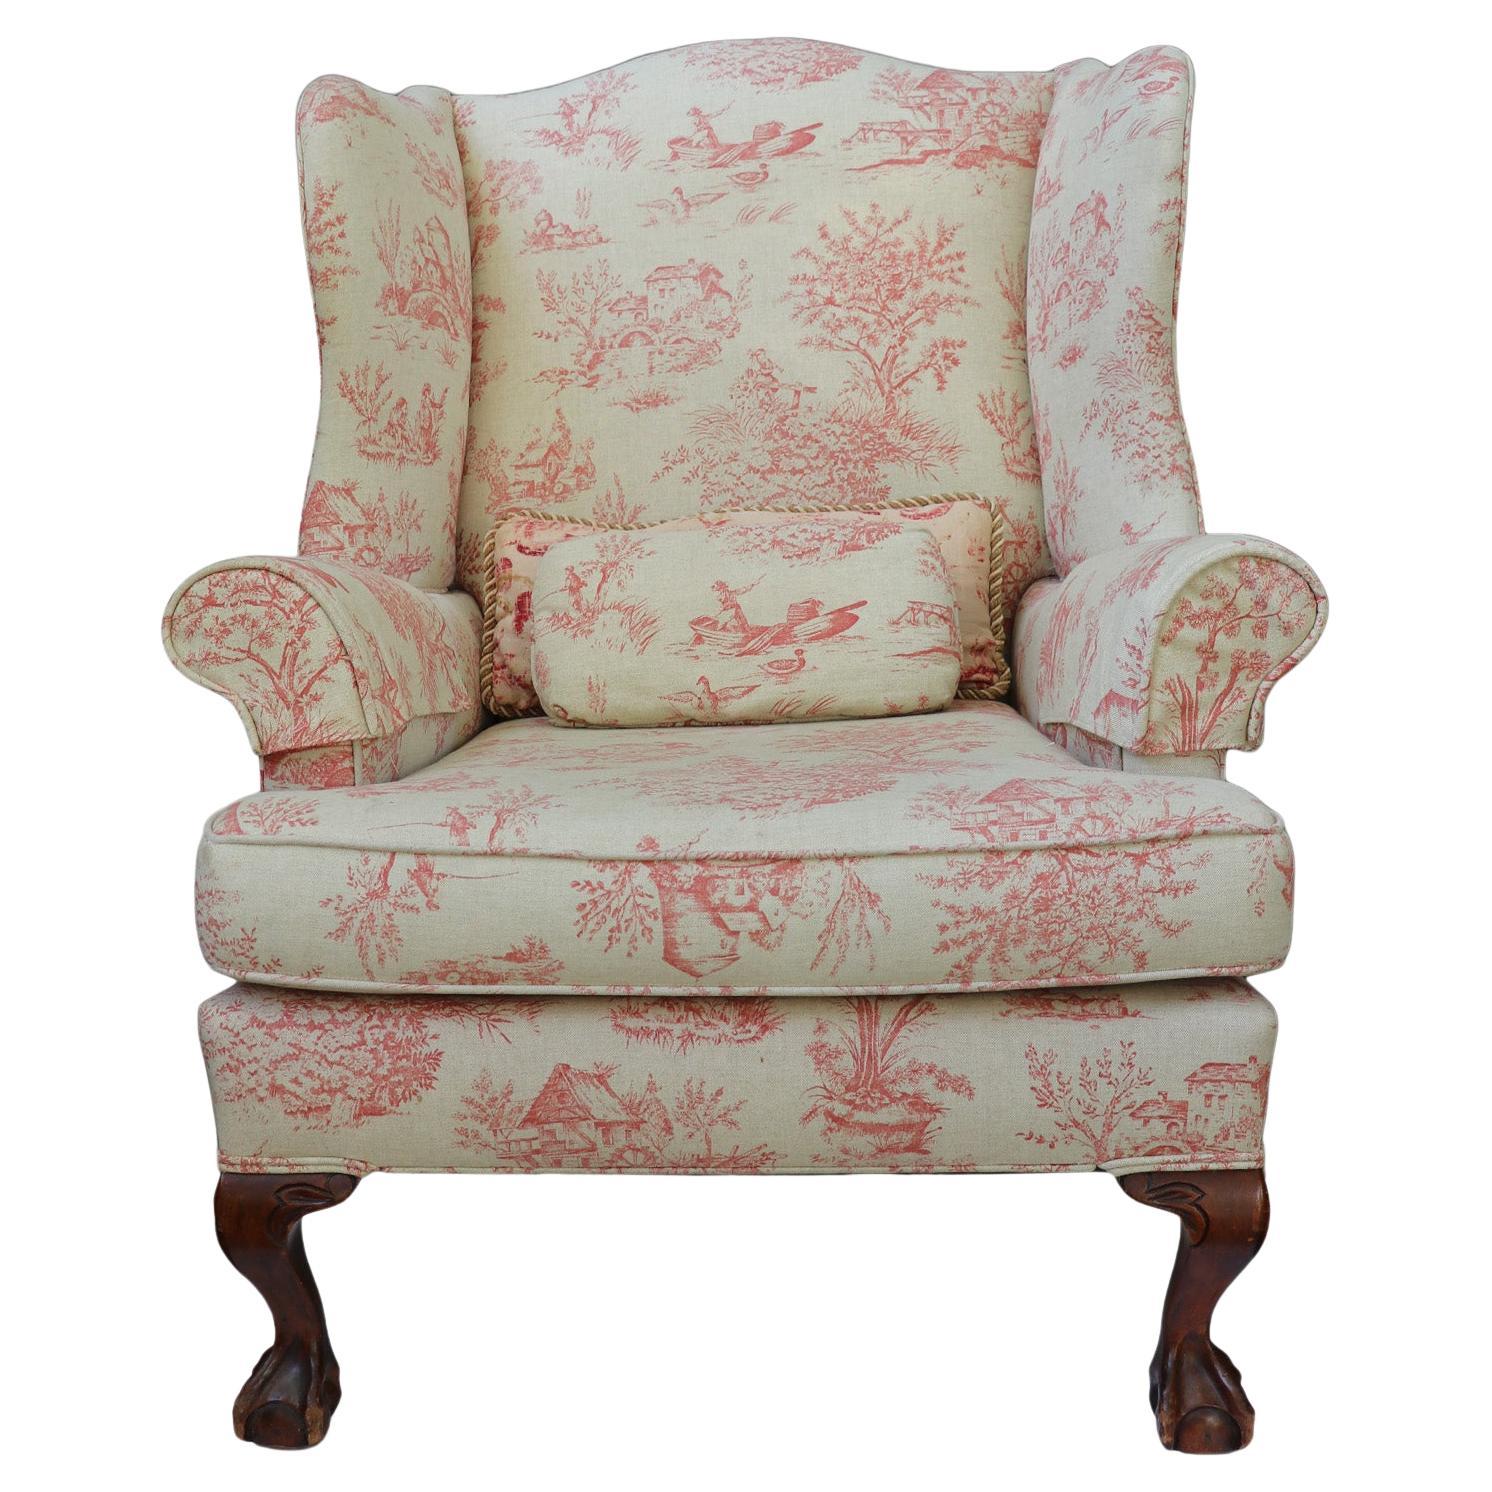 Vintage Decorative Fabric Chair For Sale